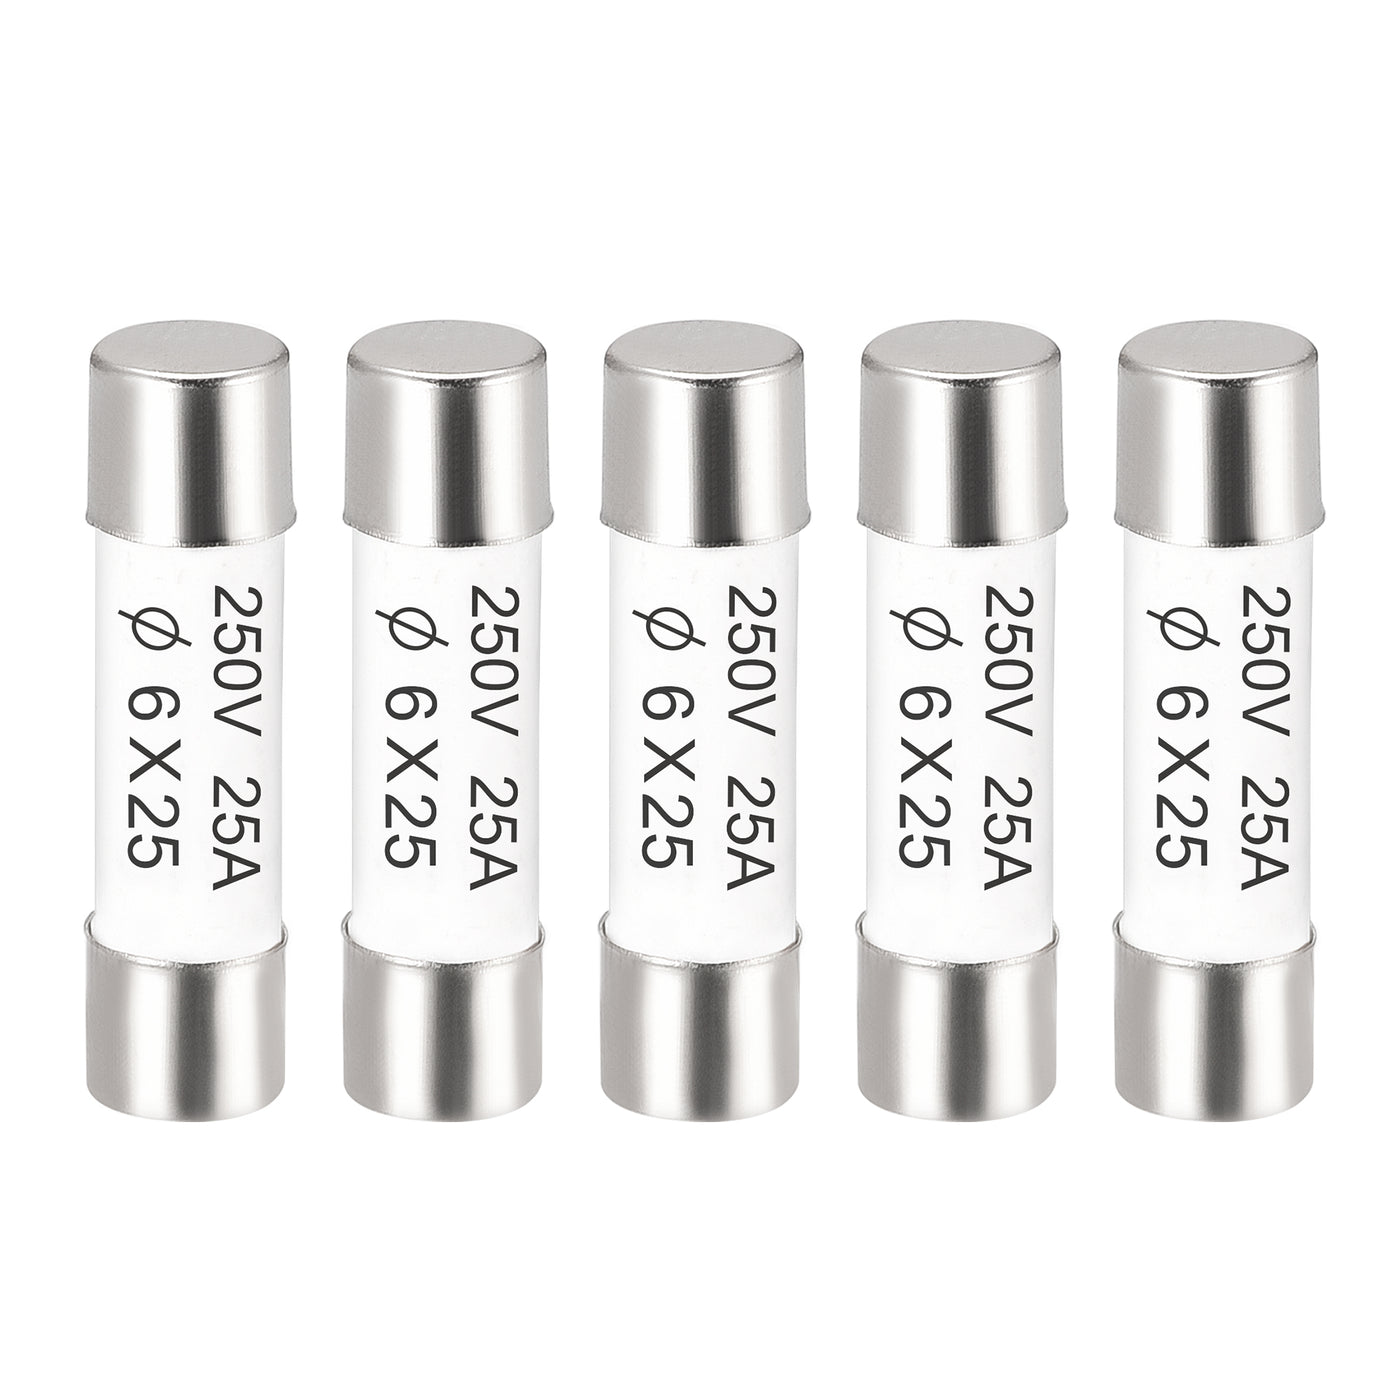 uxcell Uxcell Ceramic Cartridge Fuses 25A 250V 6x25mm Fast Blow for Energy Saving Lamp 5pcs